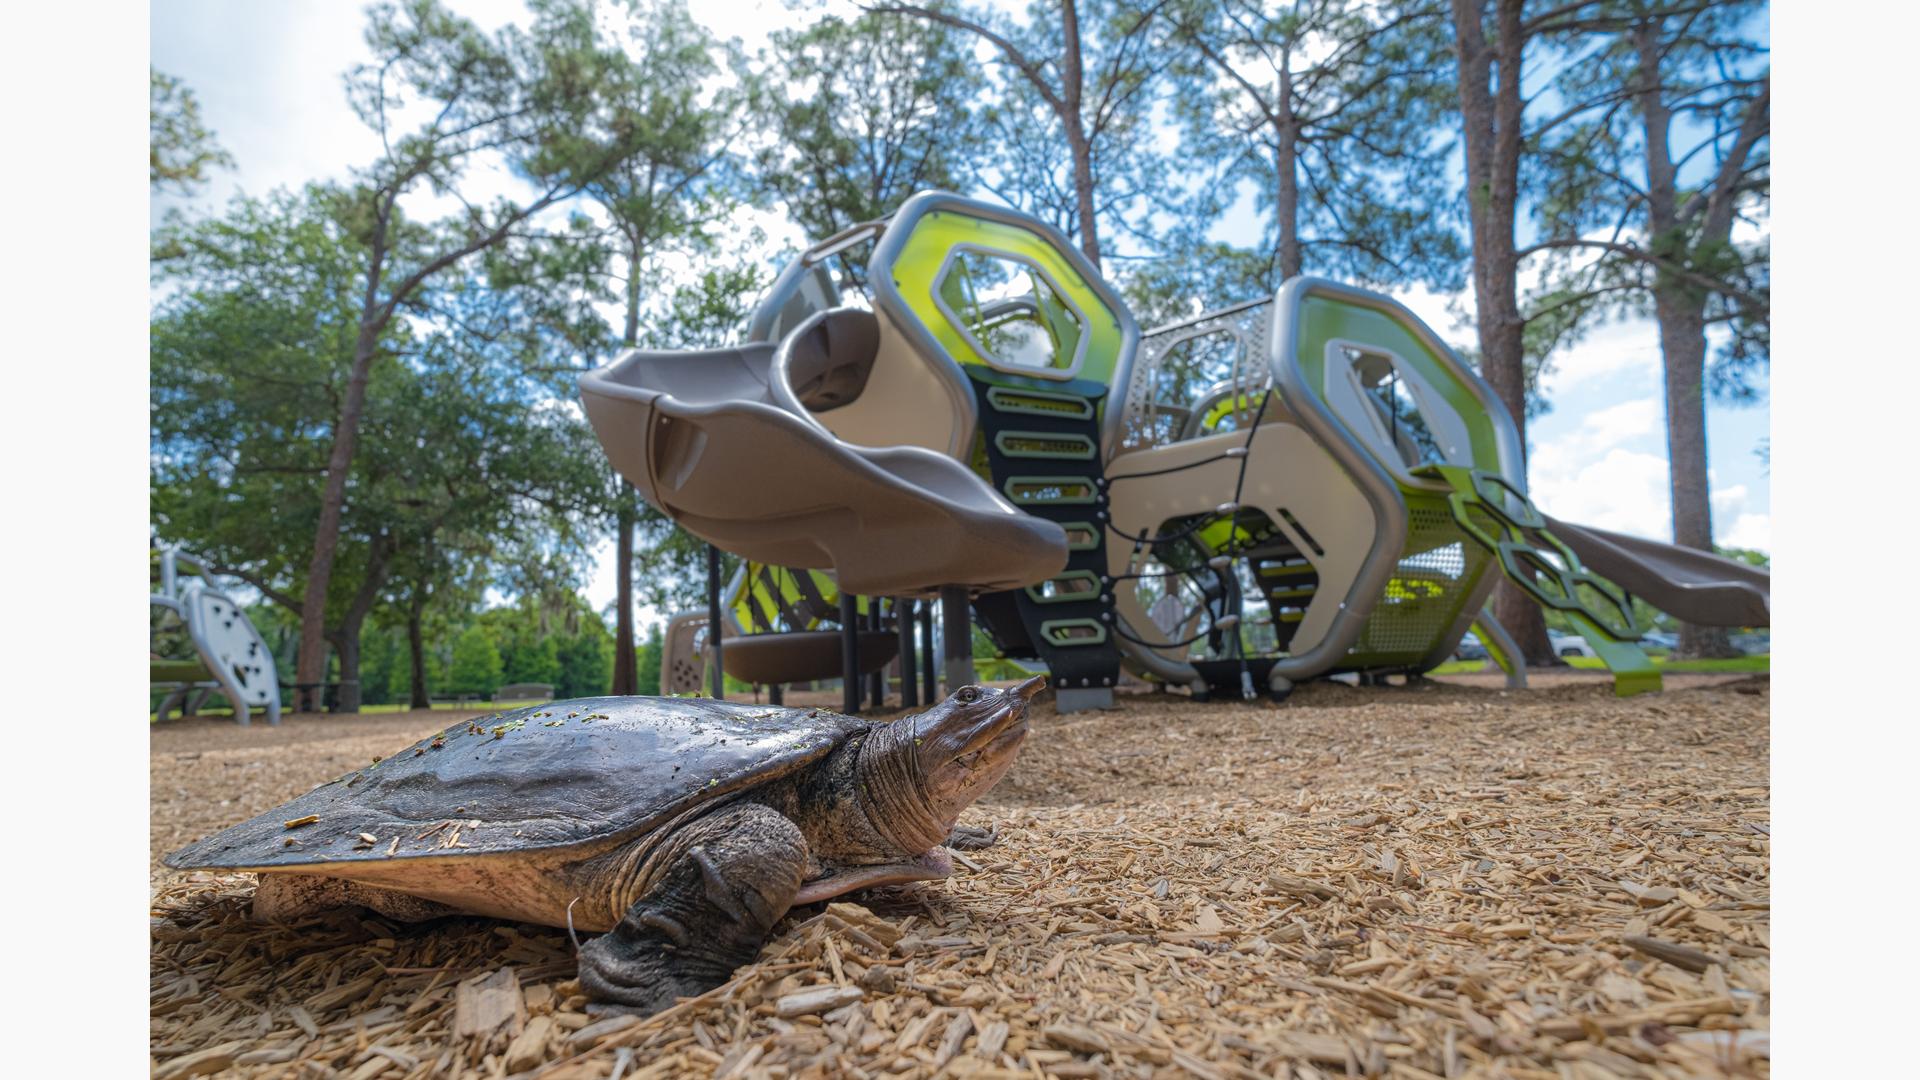 Turtle walking in front of 2-5 year Hedra playground at Highland Recreation complex in Largo, FL